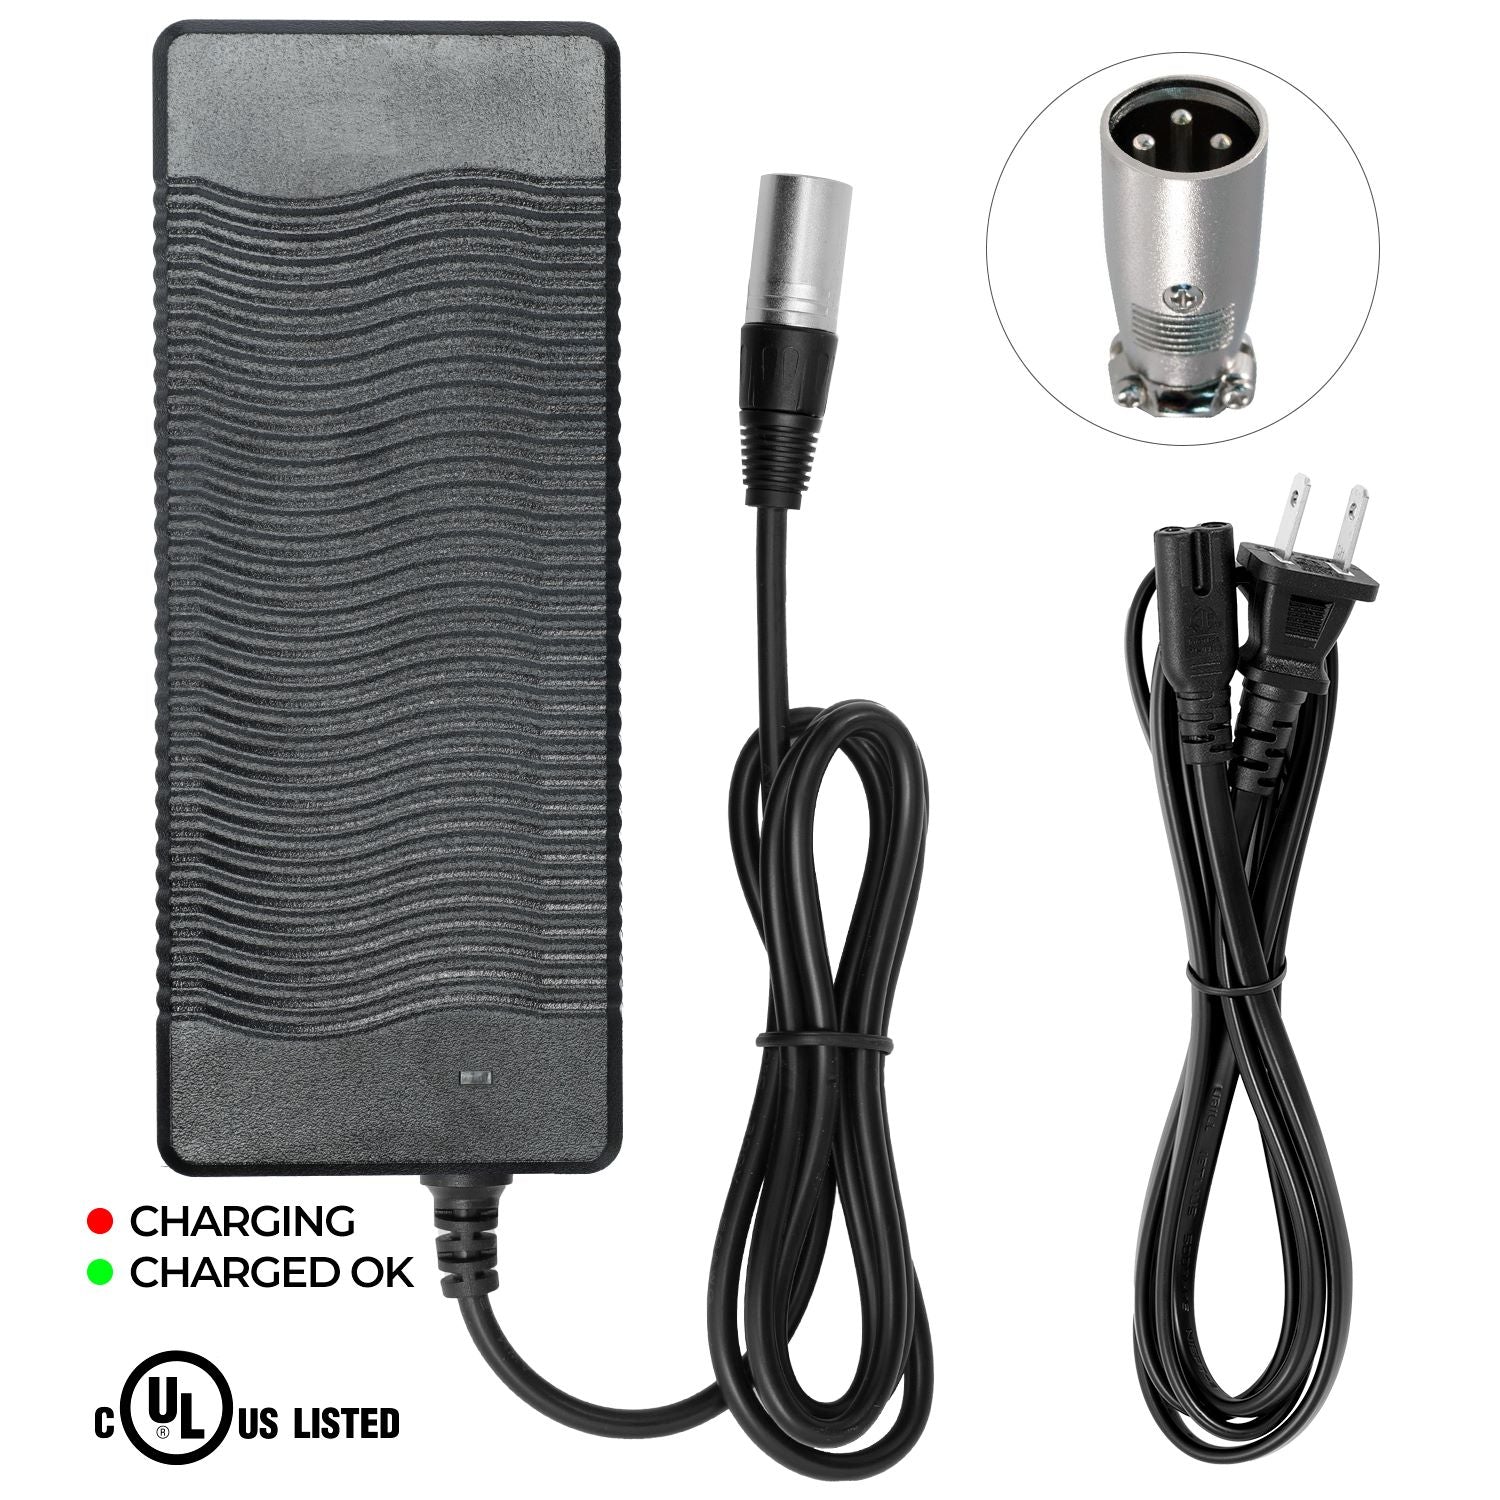 UL Listed Charger for Pedego Interceptor II eBike (NOT for Other Pedego Models,Please Check the DC Shape Carefully)